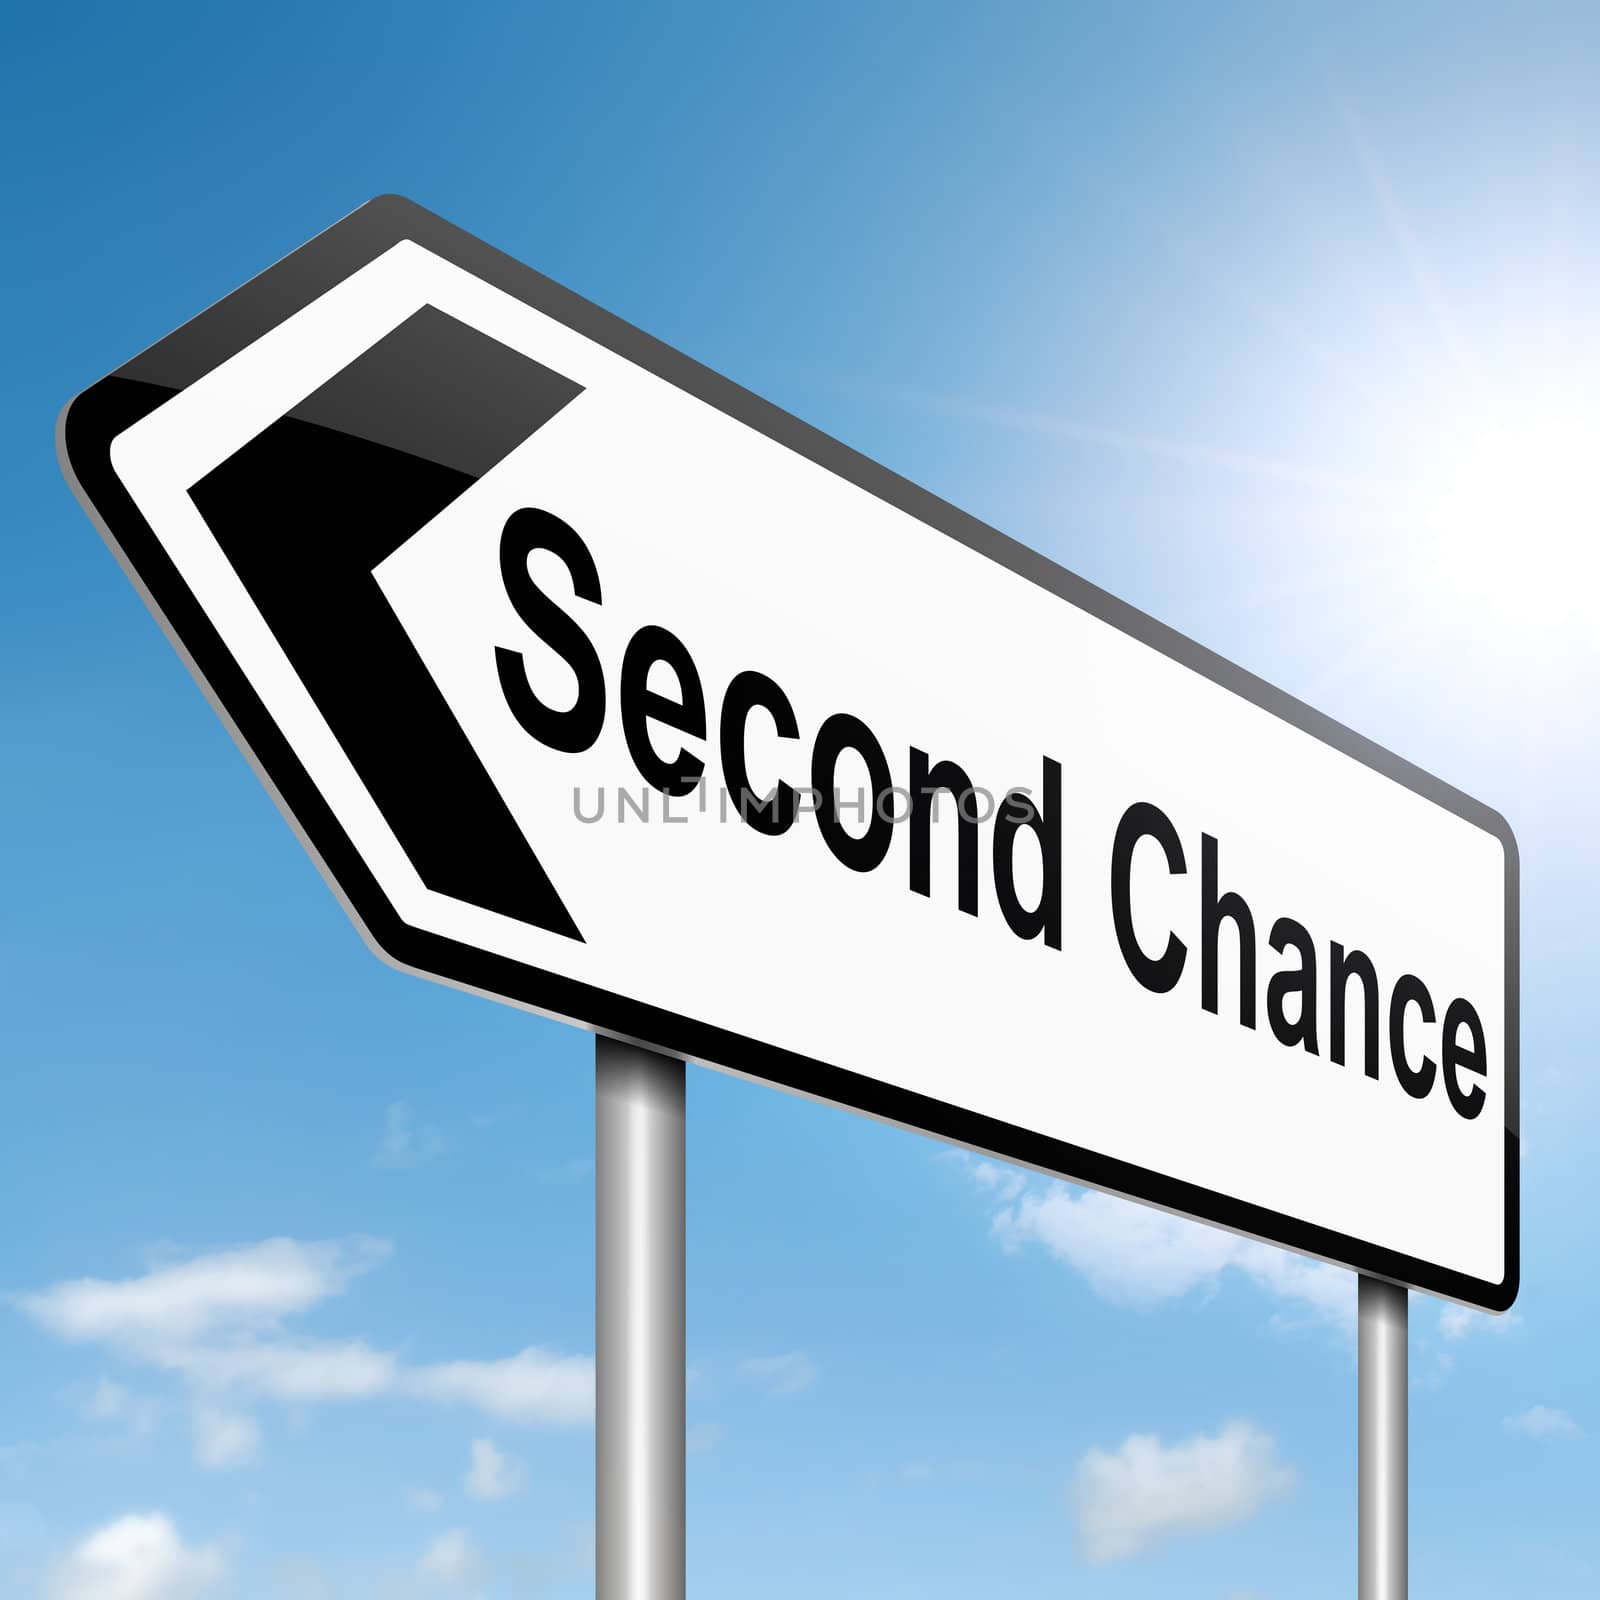 Illustration depicting a roadsign with a second chance concept. Sky background.